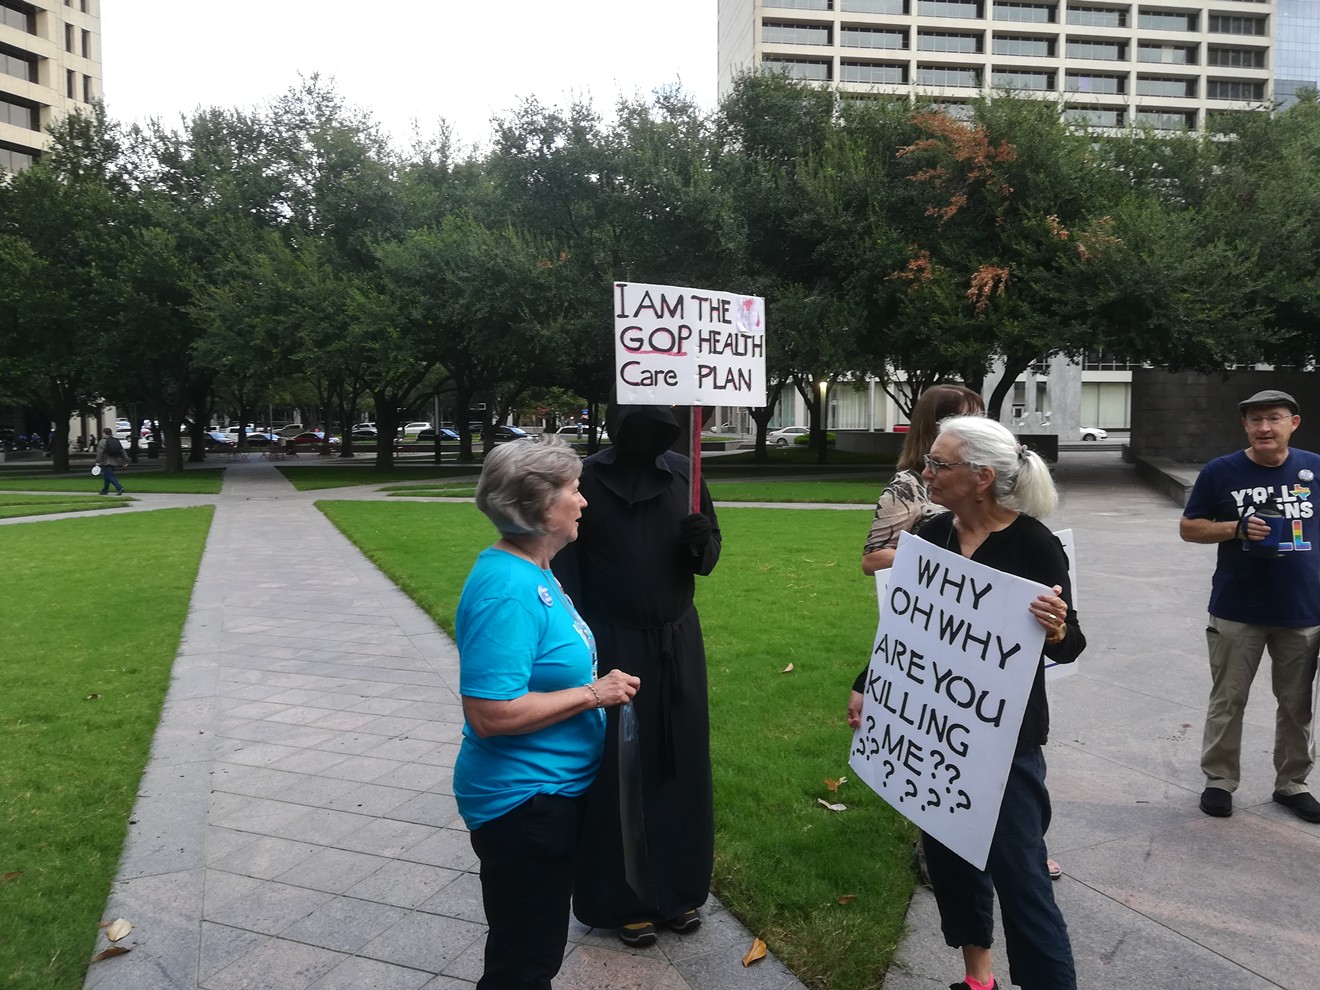 Protesters for the Affordable Care Act in Fort Worth